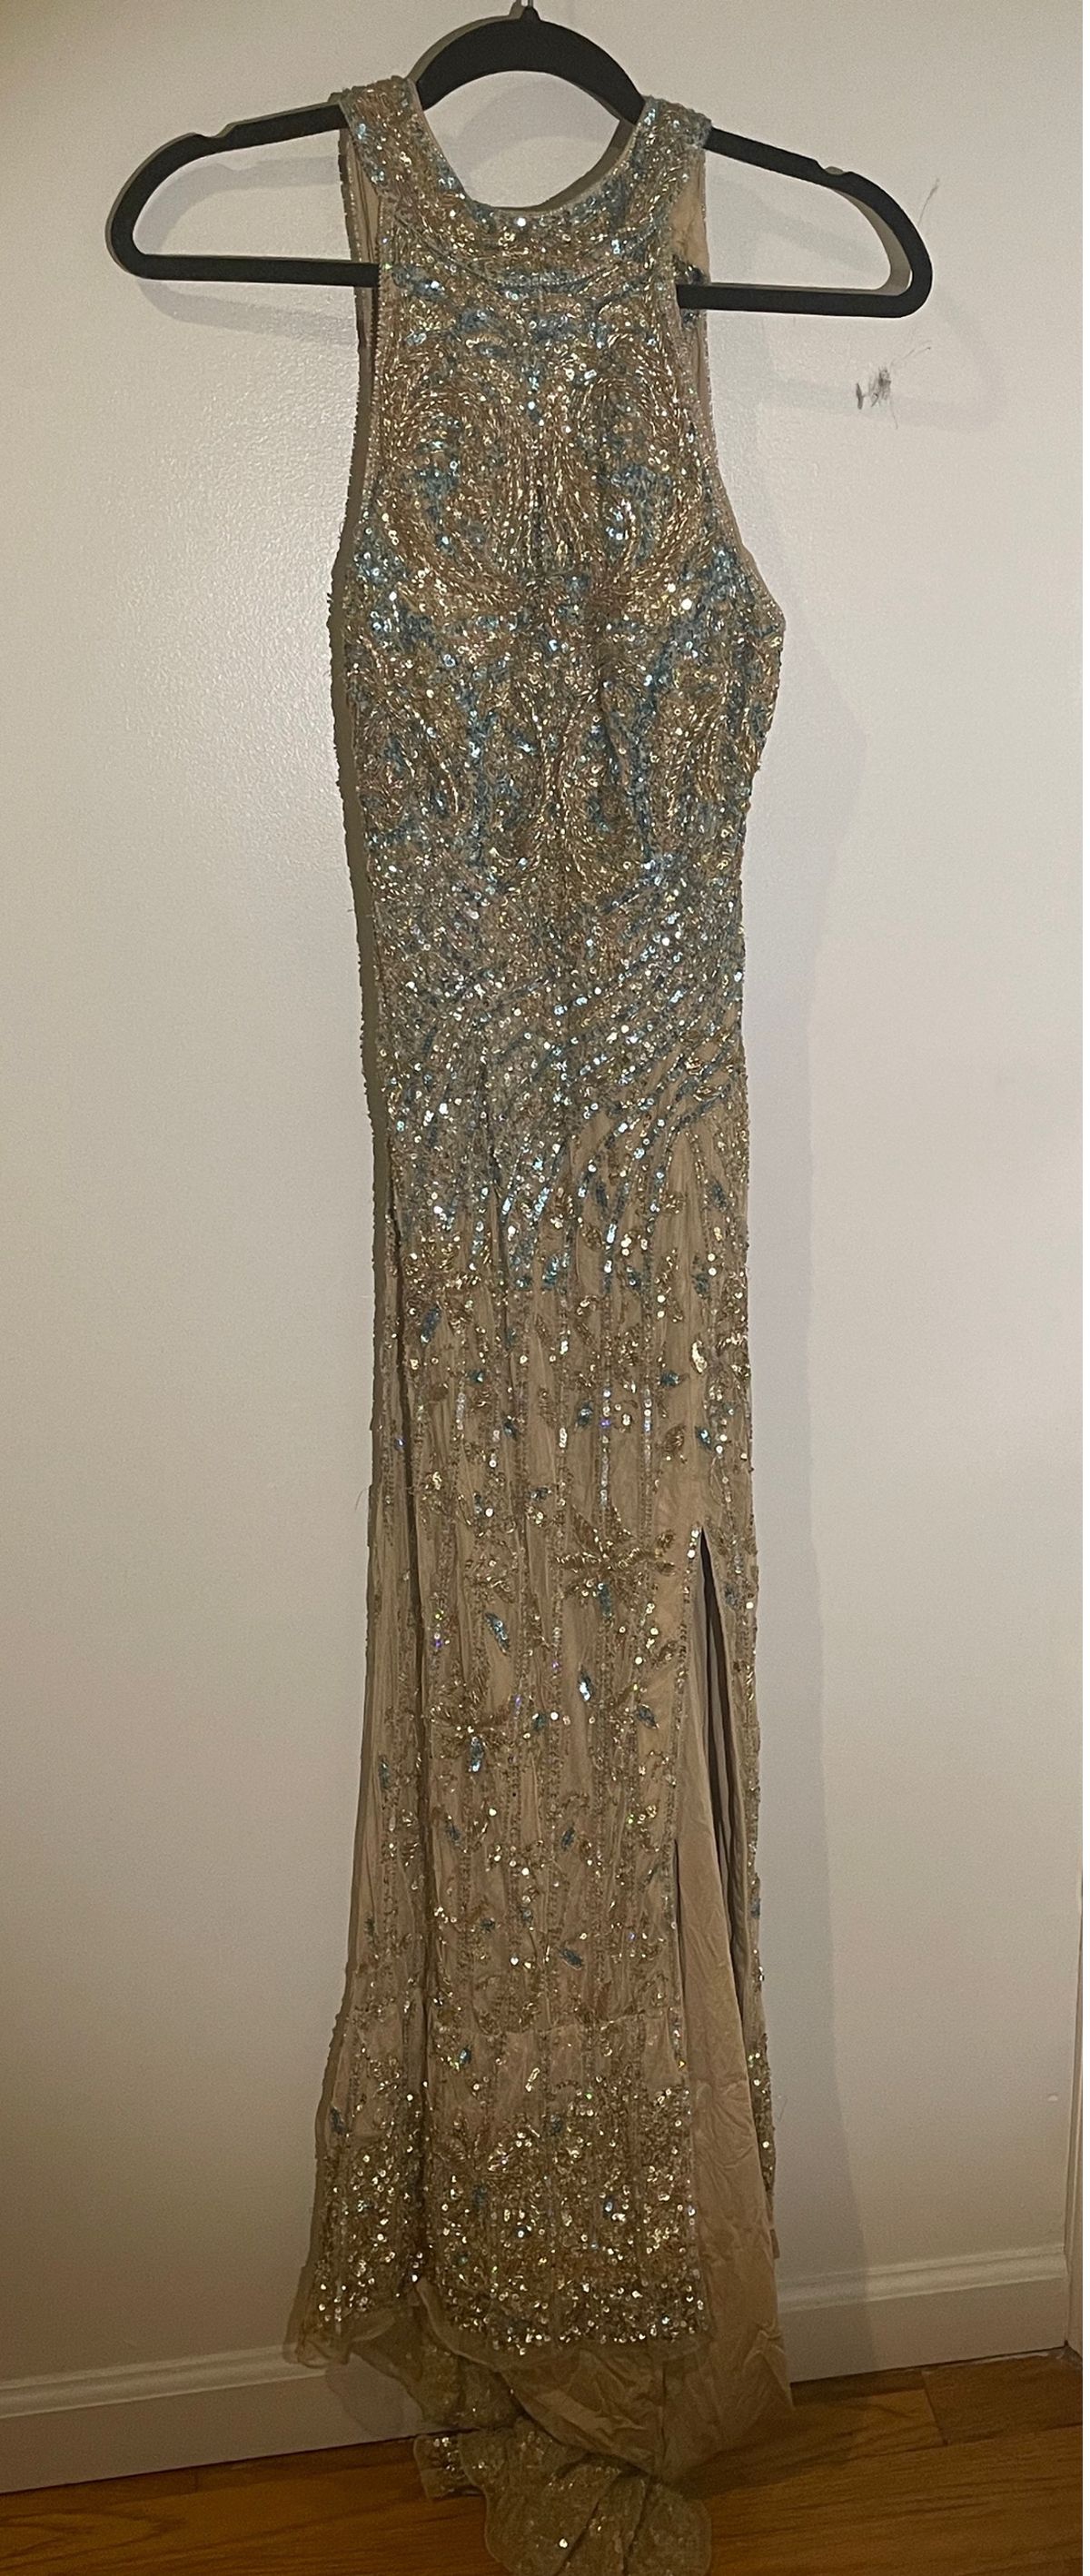 Sherri Hill Size 4 Prom High Neck Sequined Gold Mermaid Dress on Queenly